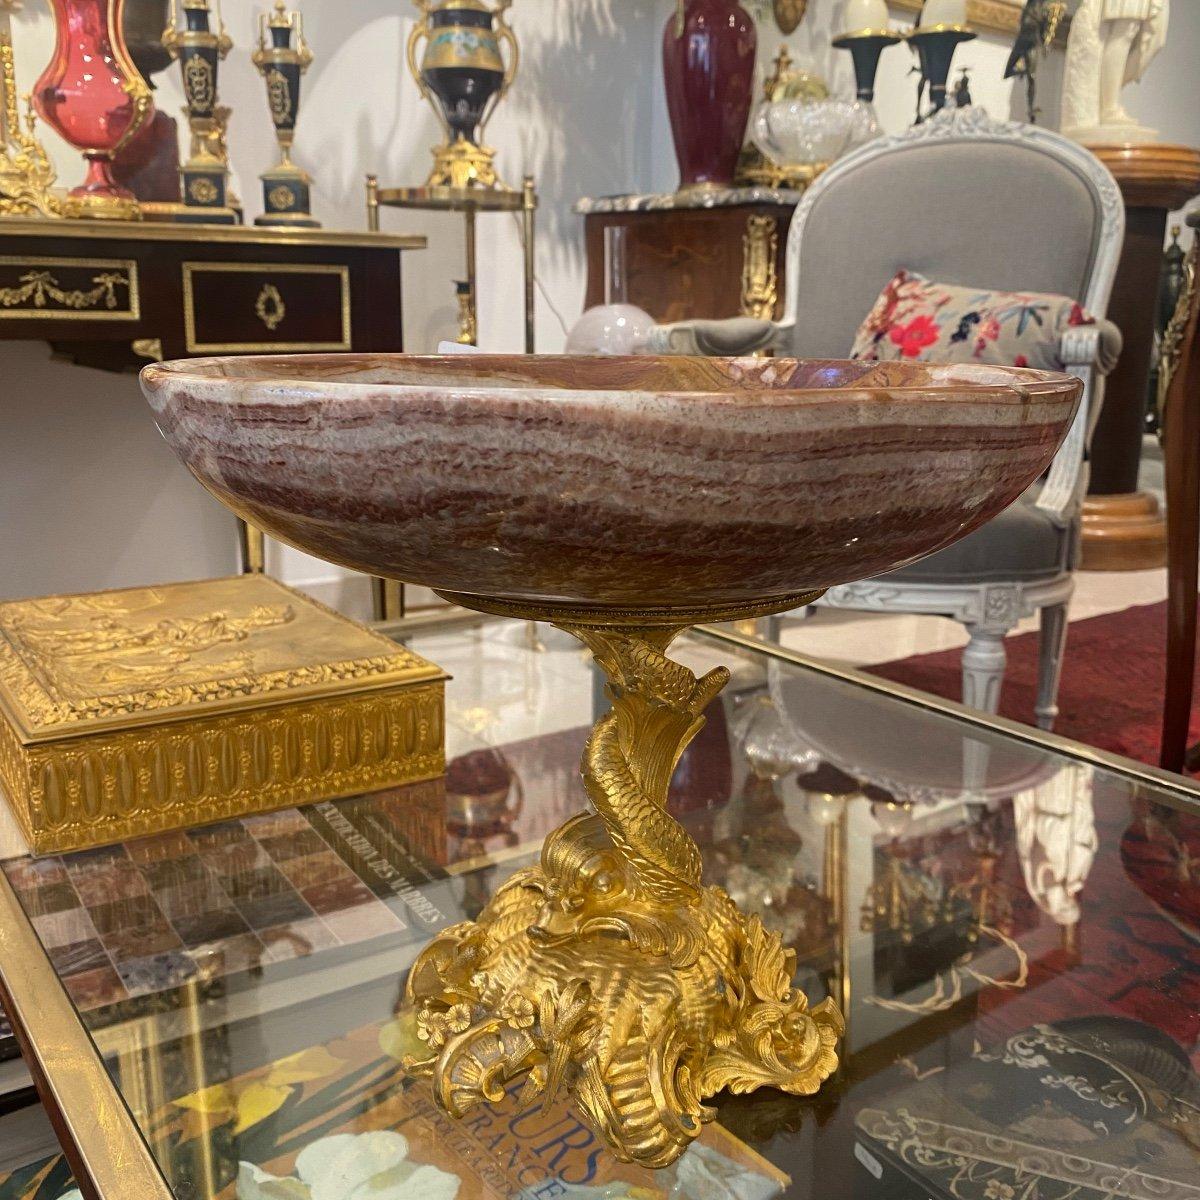 We present you with this unique, rare and truly beautiful fruit bowl, crafted from thick veined red-brown marble, elegantly presented on a late 19th-century gilded bronze stand. Originating from the Napoleon III era, spanning from 1852 to 1870, the